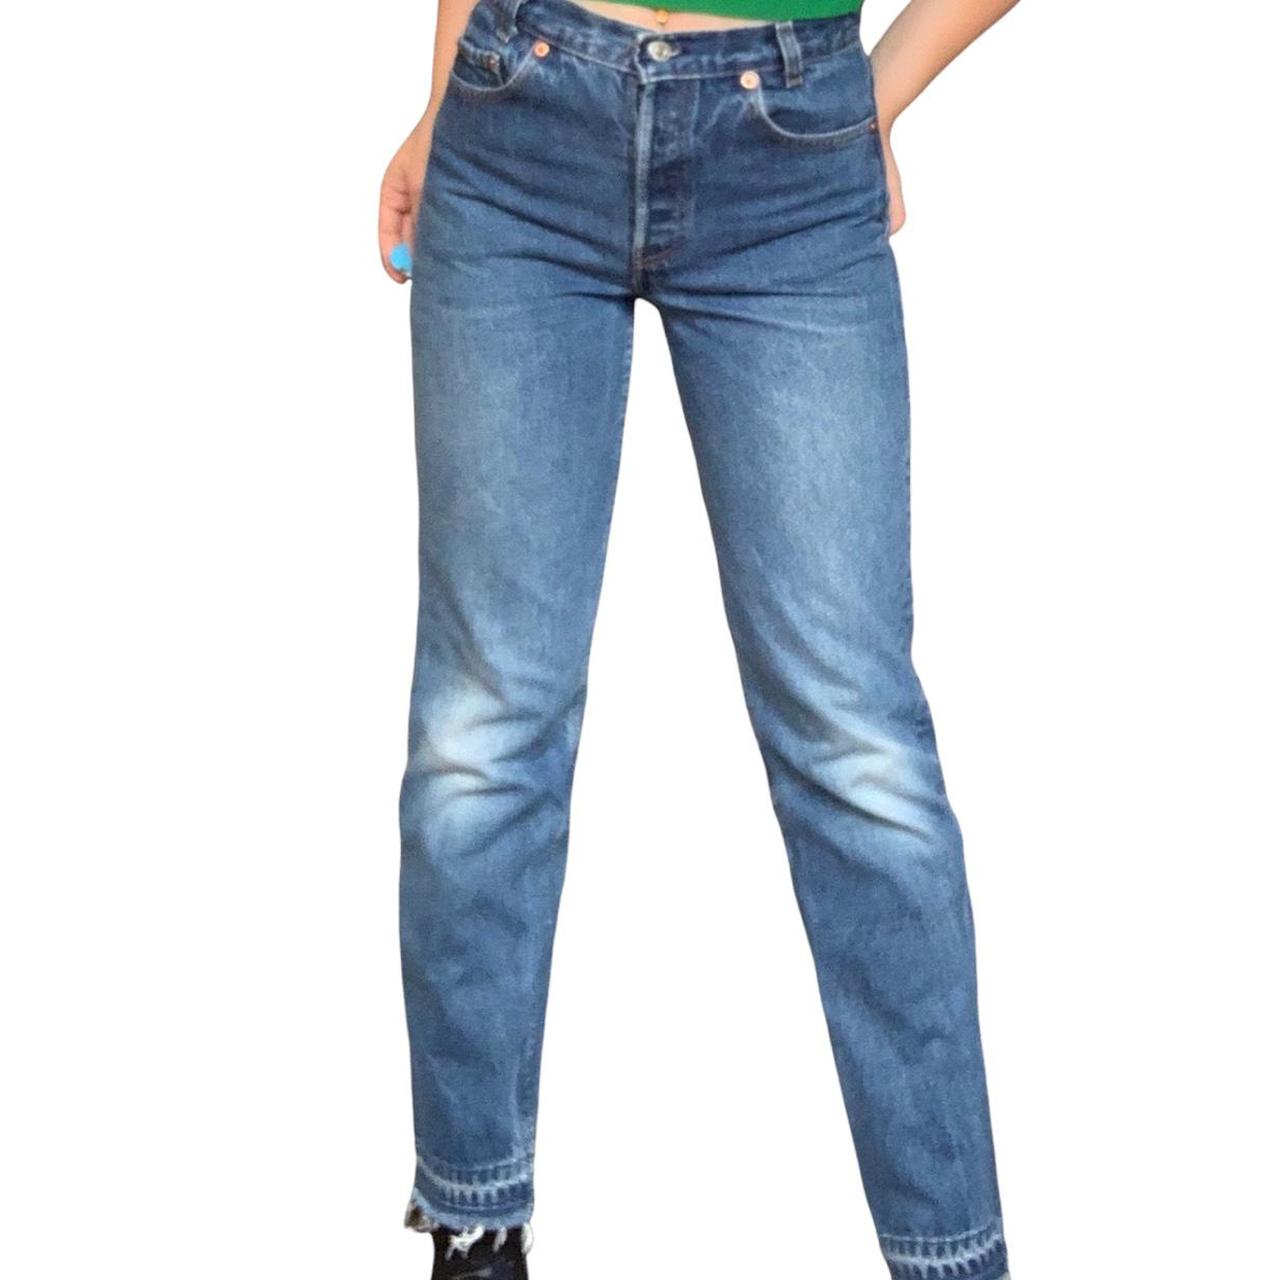 Product Image 3 - Levi’s 701/501 student fit reference!